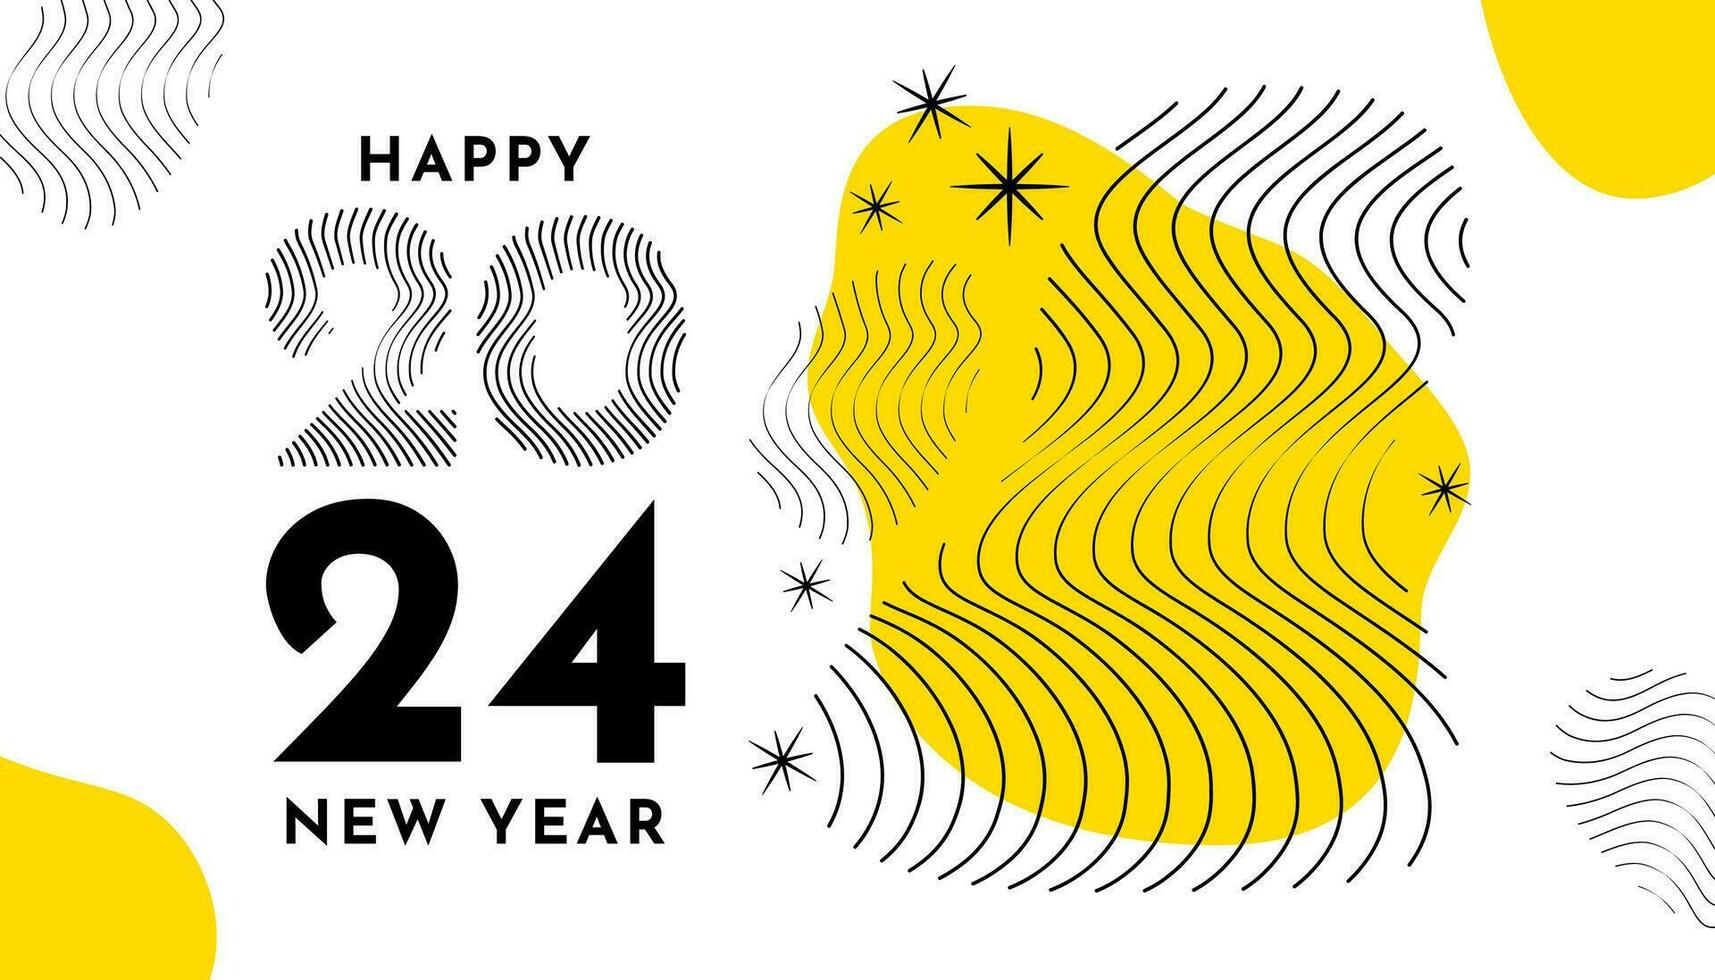 Happy New Year 2024 with different numbers design with festive colors concept. Premium Vector Design for 2024 New Year Speech. Backgrounds for branding, banner, cover.